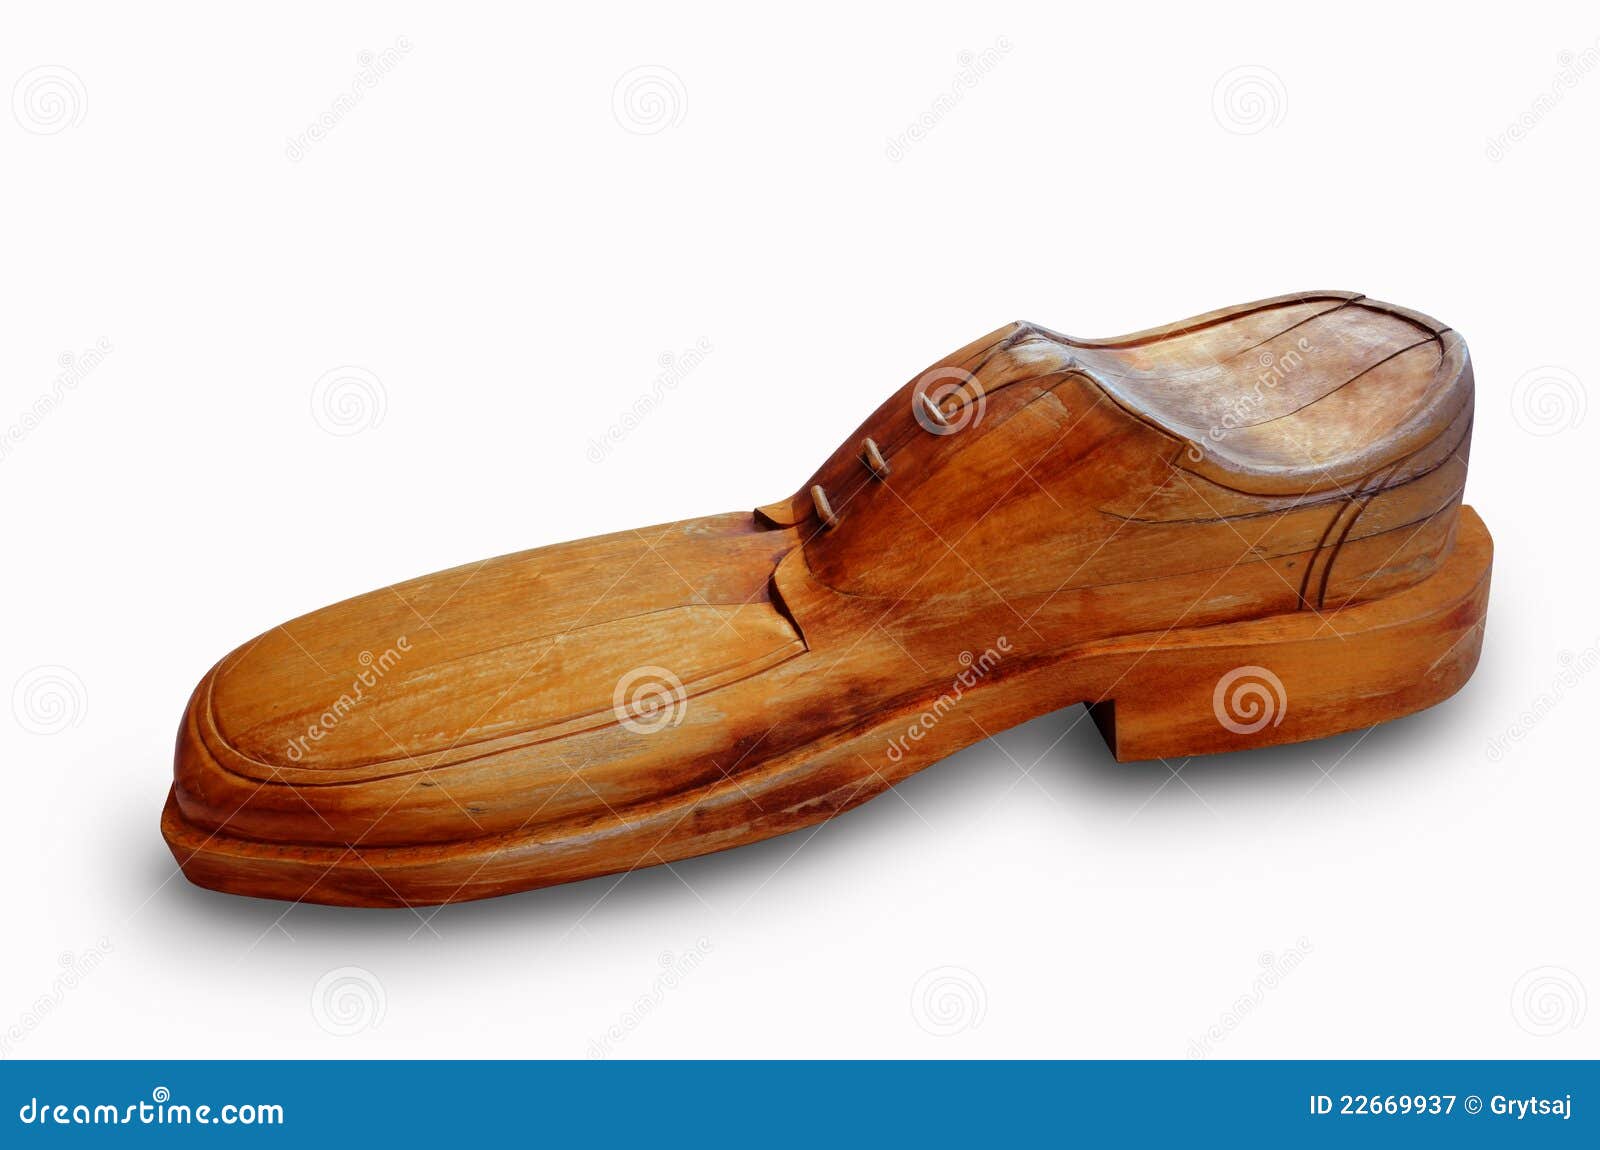 Wooden shoe stock image. Image of shoe, wooden, used - 22669937